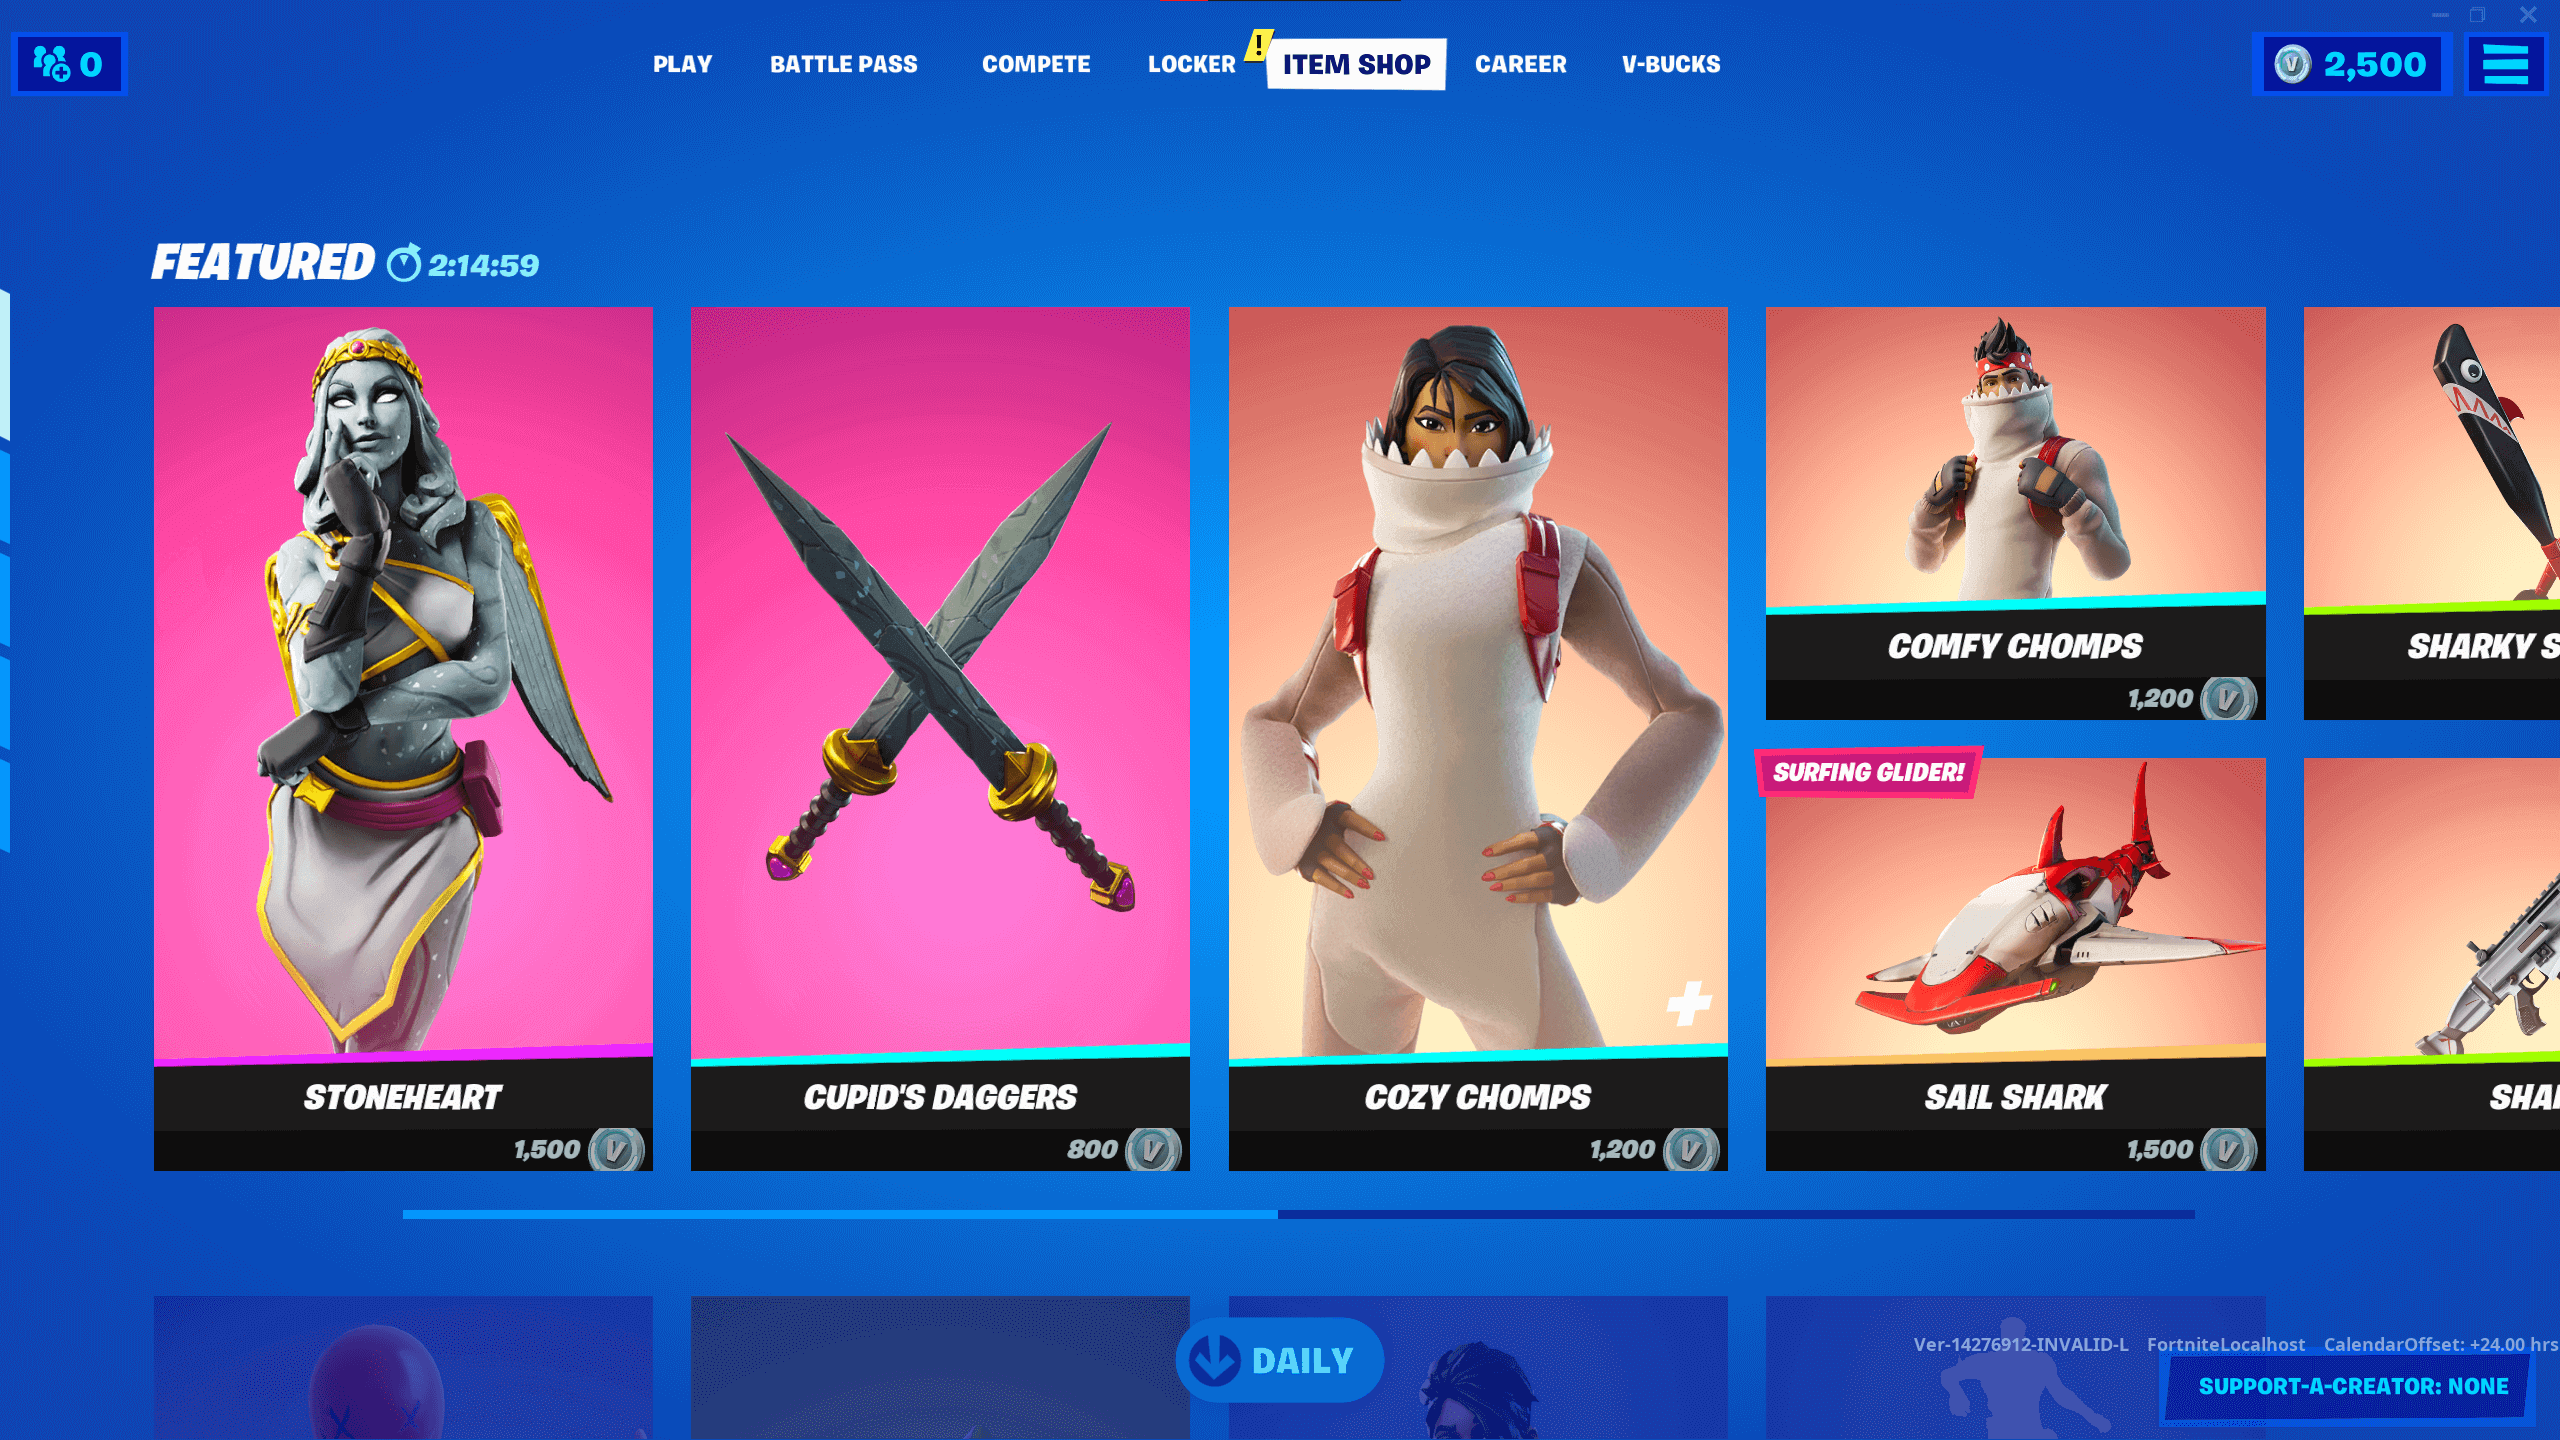 Check out Fortnite’s newlook Item Shop